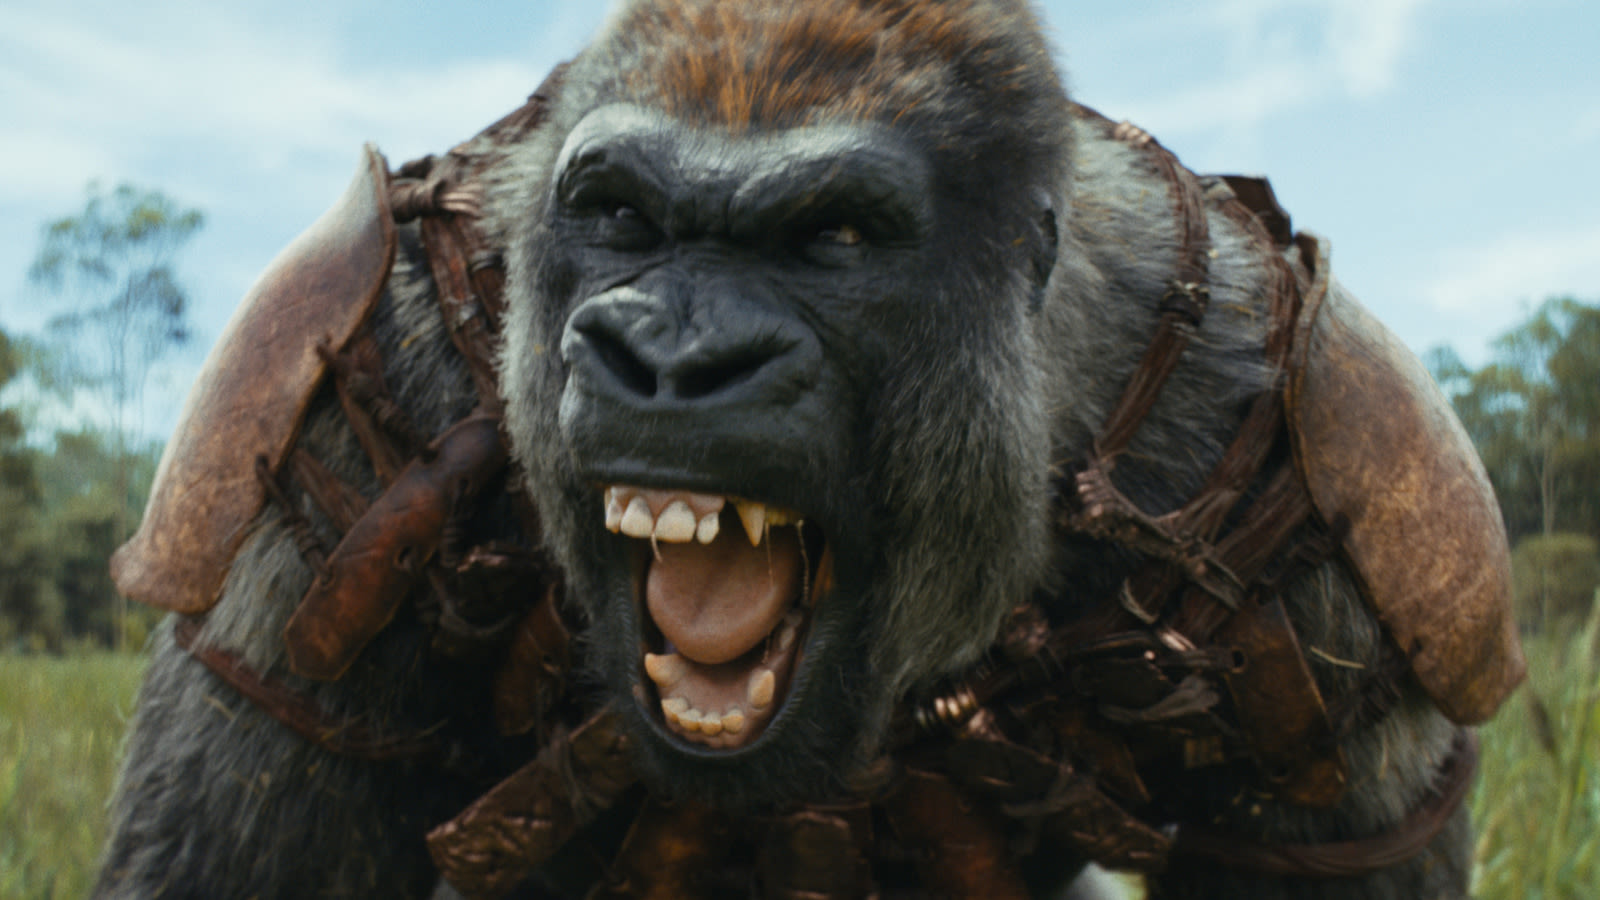 Kingdom Of The Planet Of The Apes Rules The Weekend Box Office With $52-55 Million Debut - SlashFilm